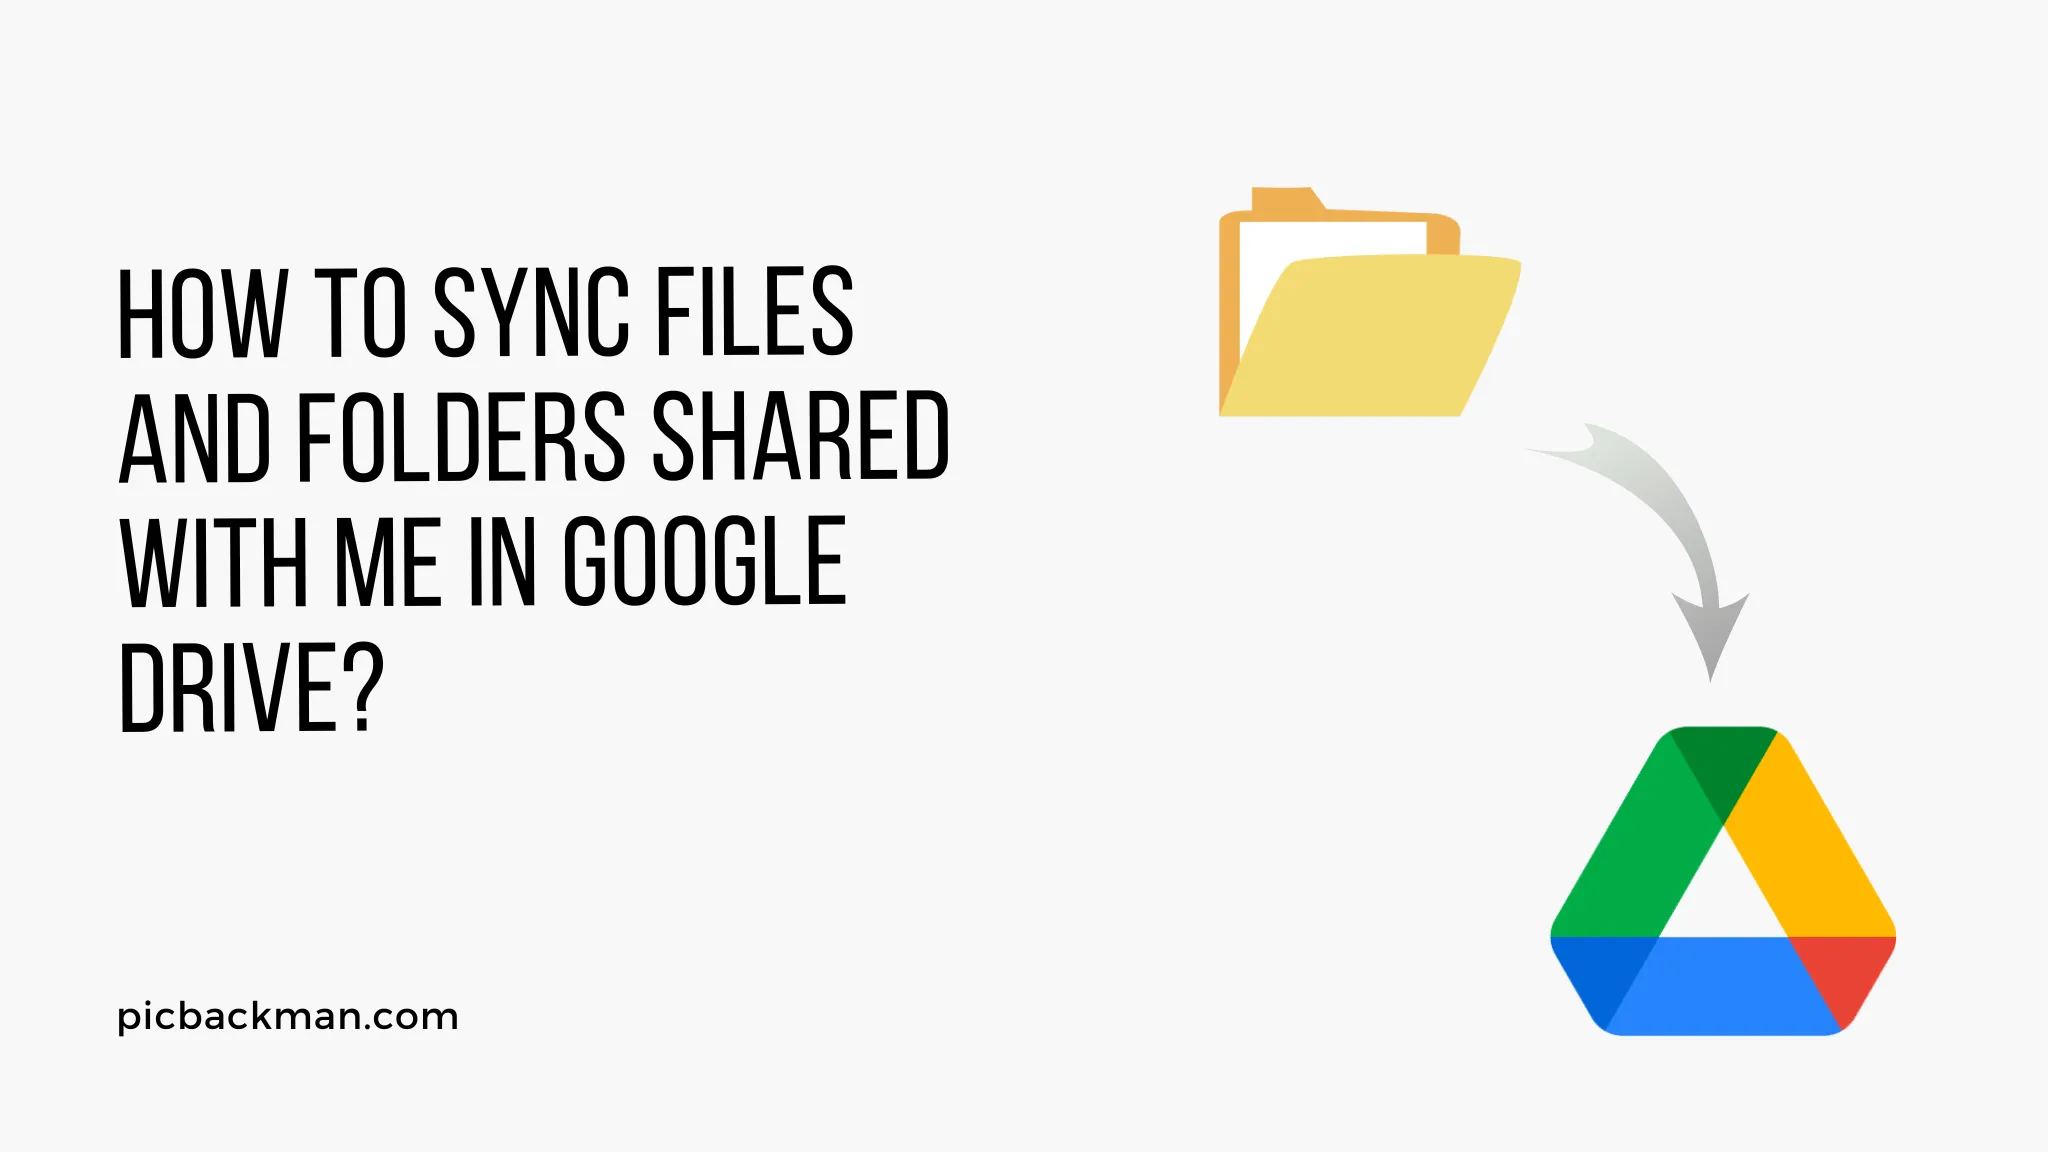 How to Sync Files and Folders Shared With Me in Google Drive